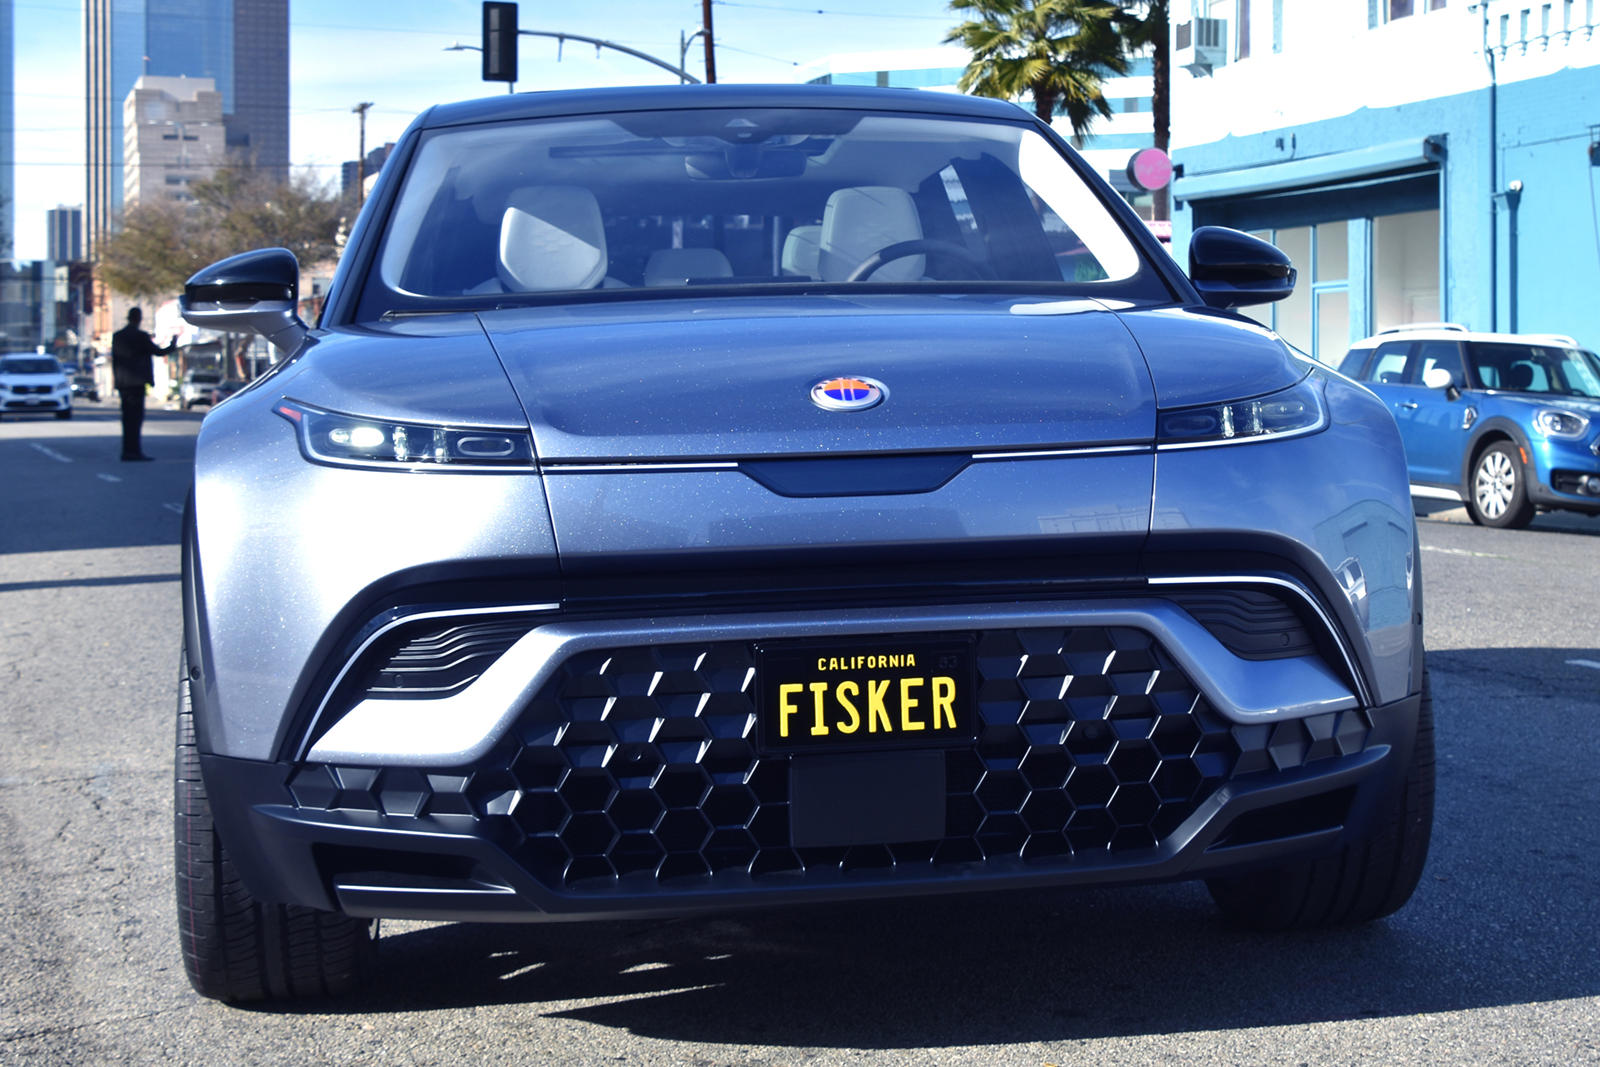 Expected to go on sale next year, the Fisker Ocean will enter the hotly con...